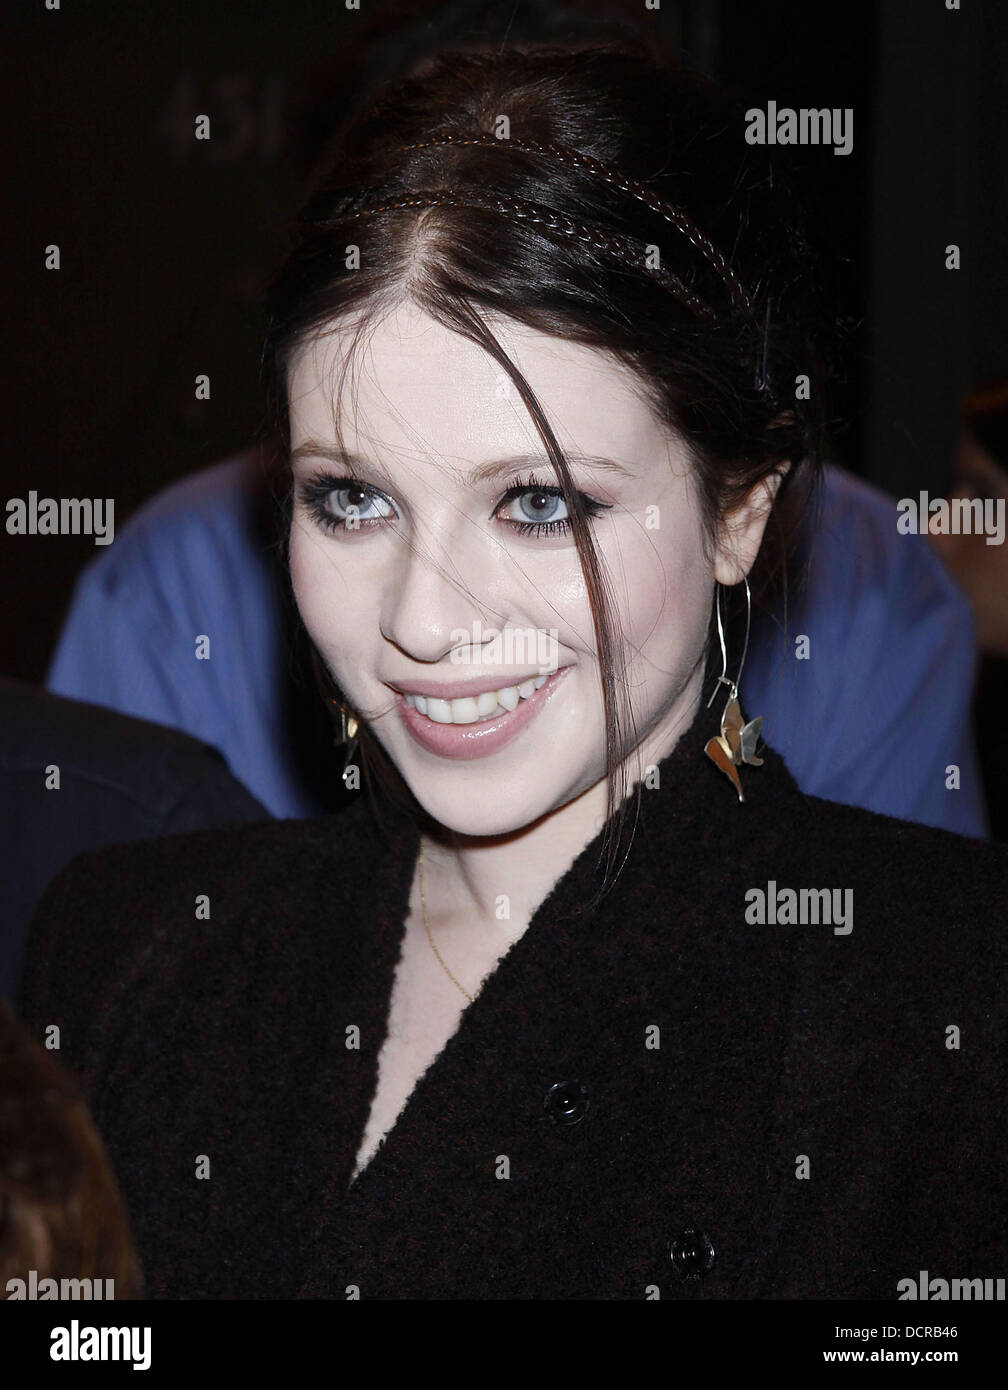 Michelle Trachtenberg from 'Gossip Girl'  Celebrity Charades 2011: Down and Derby held at the Highline Ballroom - Arrivals.  New York City, USA - 14.11.11 Stock Photo